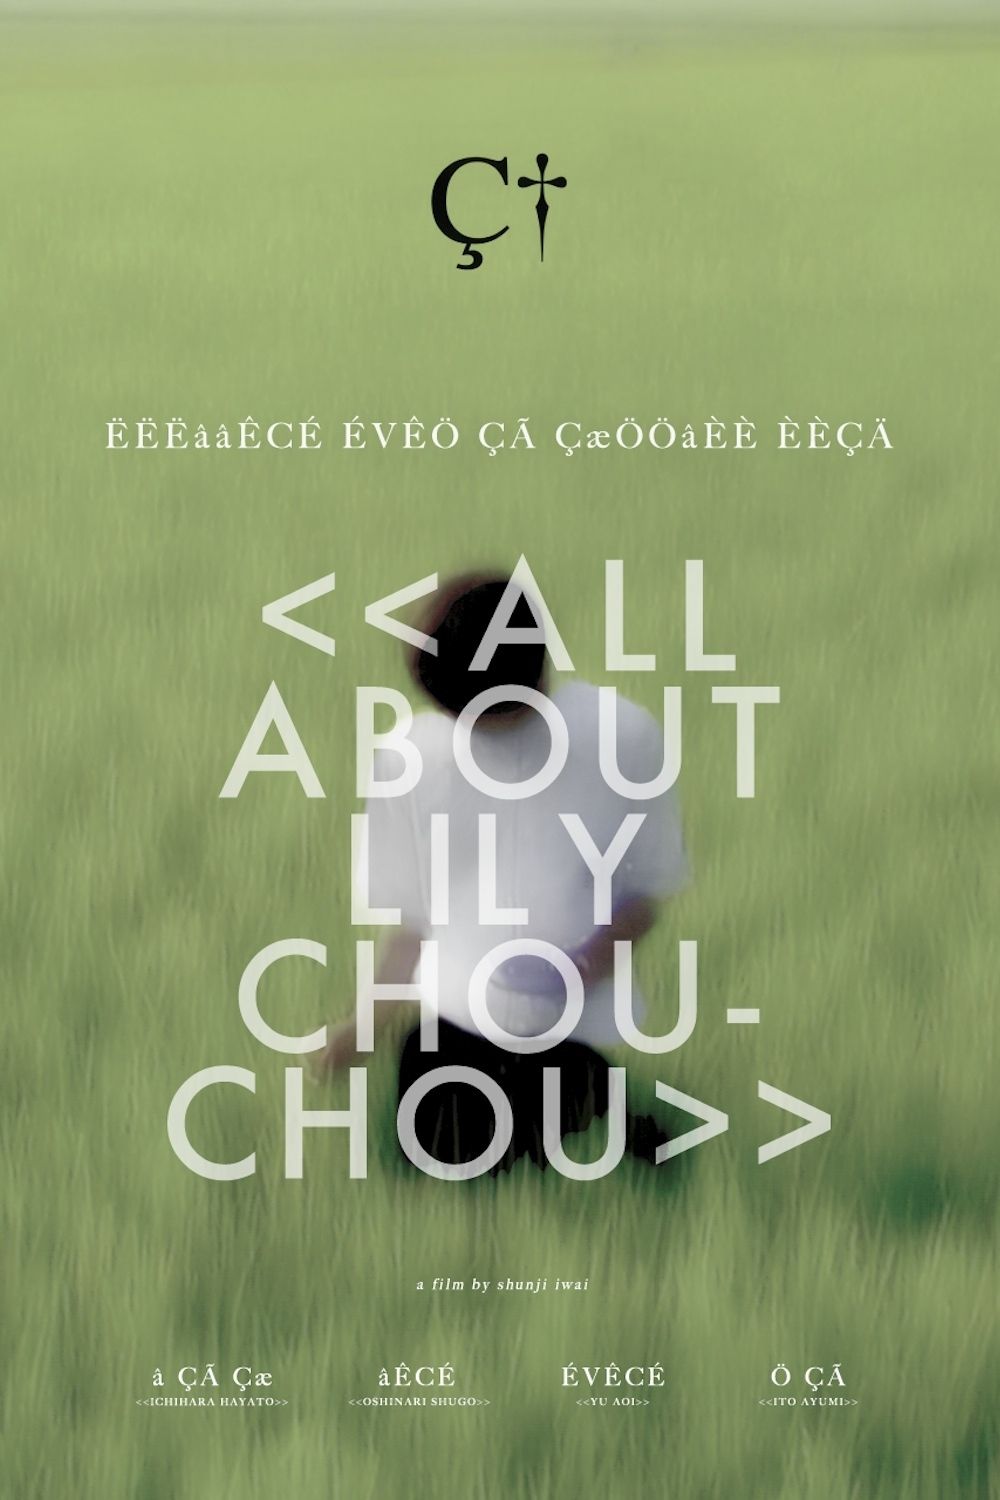 All About Lily Chou-Chou (2001) with English Subtitles on DVD on DVD